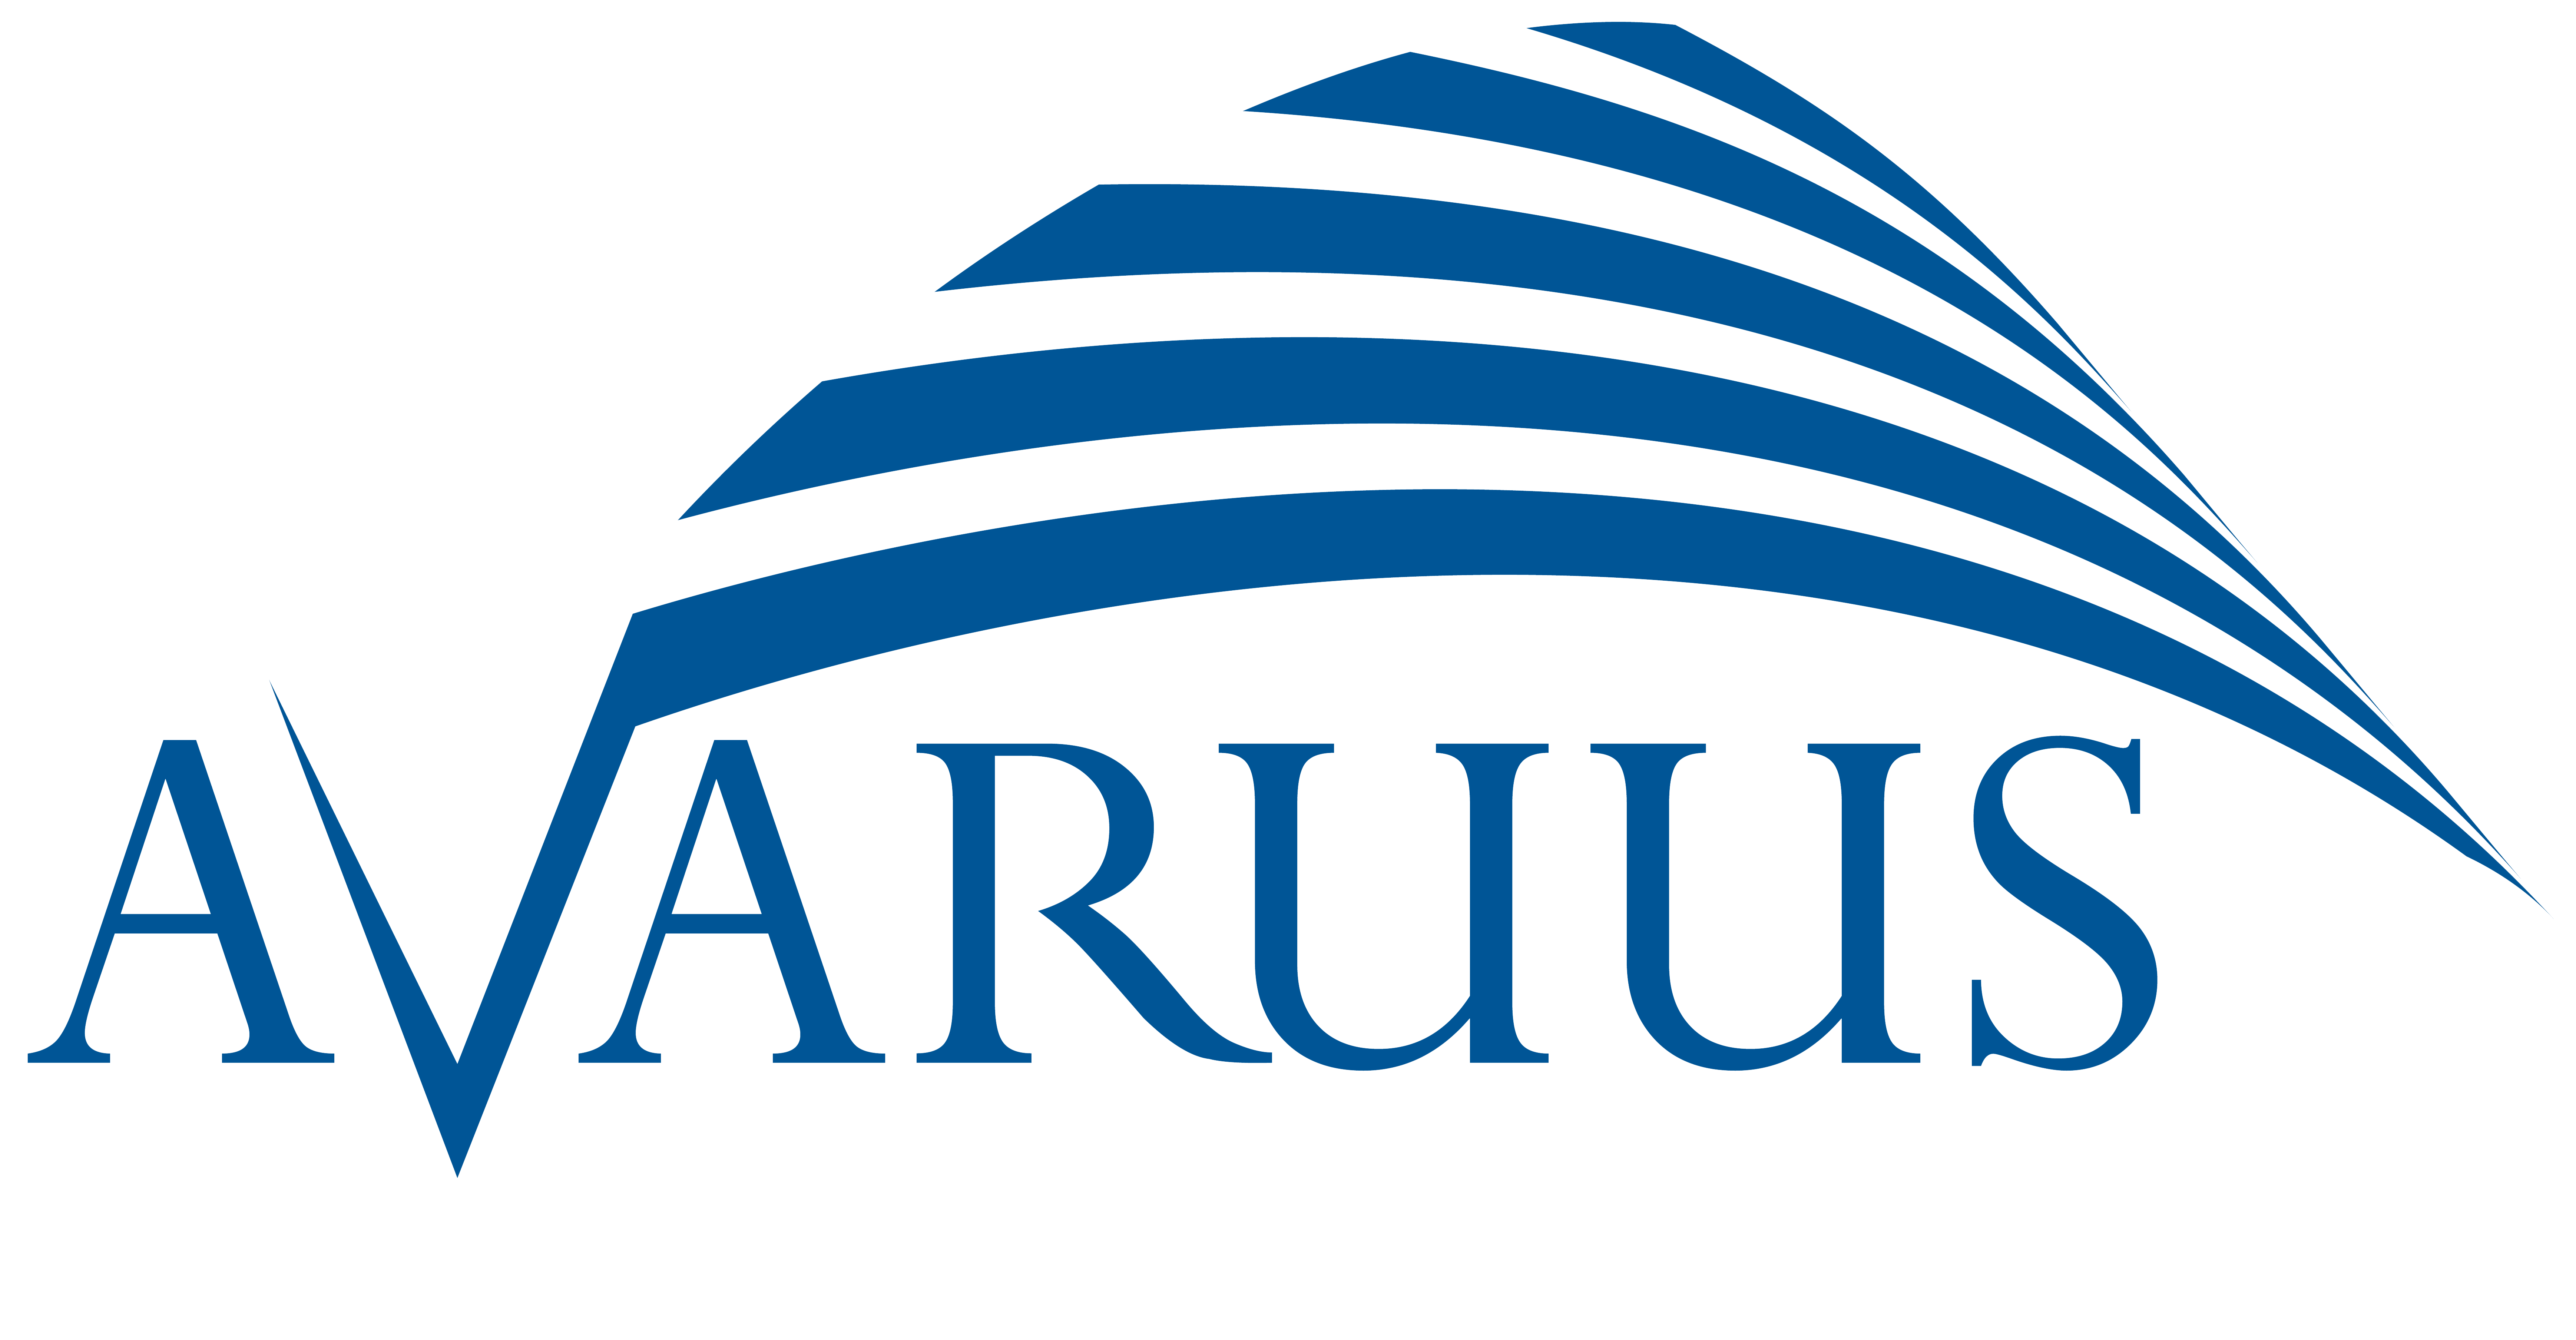 Avaruus is an Architecture Firm located in Las Vegas, NV